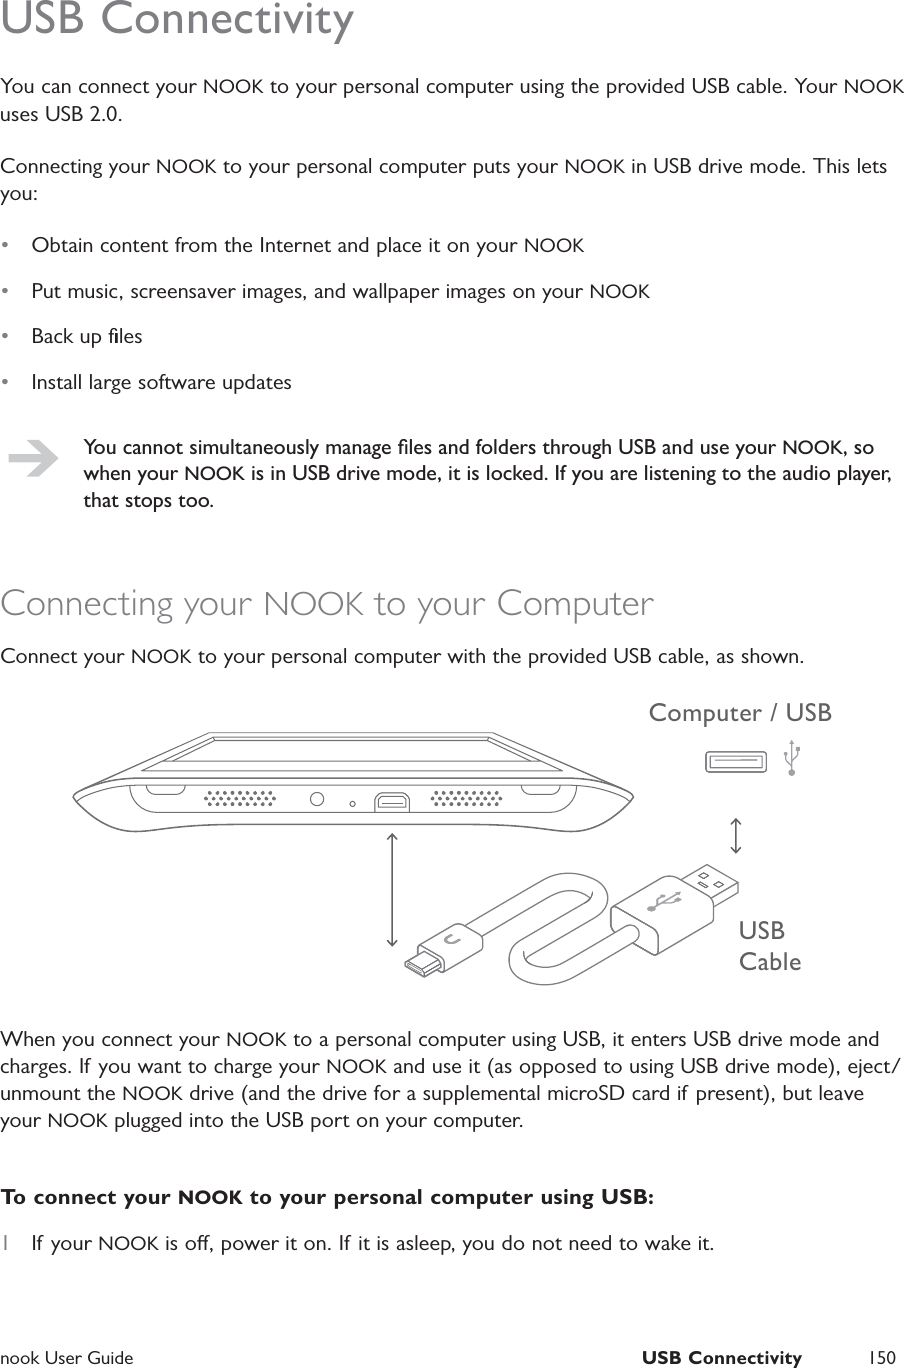  nook User Guide  USB Connectivity 150USB ConnectivityYou can connect your NOOK to your personal computer using the provided USB cable. Your NOOK uses USB 2.0.Connecting your NOOK to your personal computer puts your NOOK in USB drive mode. This lets you:•  Obtain content from the Internet and place it on your NOOK•  Put music, screensaver images, and wallpaper images on your NOOK•  Back up ﬁles•  Install large software updatesYou cannot simultaneously manage ﬁles and folders through USB and use your NOOK, so when your NOOK is in USB drive mode, it is locked. If you are listening to the audio player, that stops too.Connecting your NOOK to your ComputerConnect your NOOK to your personal computer with the provided USB cable, as shown.USB CableComputer / USBWhen you connect your NOOK to a personal computer using USB, it enters USB drive mode and charges. If you want to charge your NOOK and use it (as opposed to using USB drive mode), eject/unmount the NOOK drive (and the drive for a supplemental microSD card if present), but leave your NOOK plugged into the USB port on your computer.To connect your NOOK to your personal computer using USB:1  If your NOOK is o, power it on. If it is asleep, you do not need to wake it.